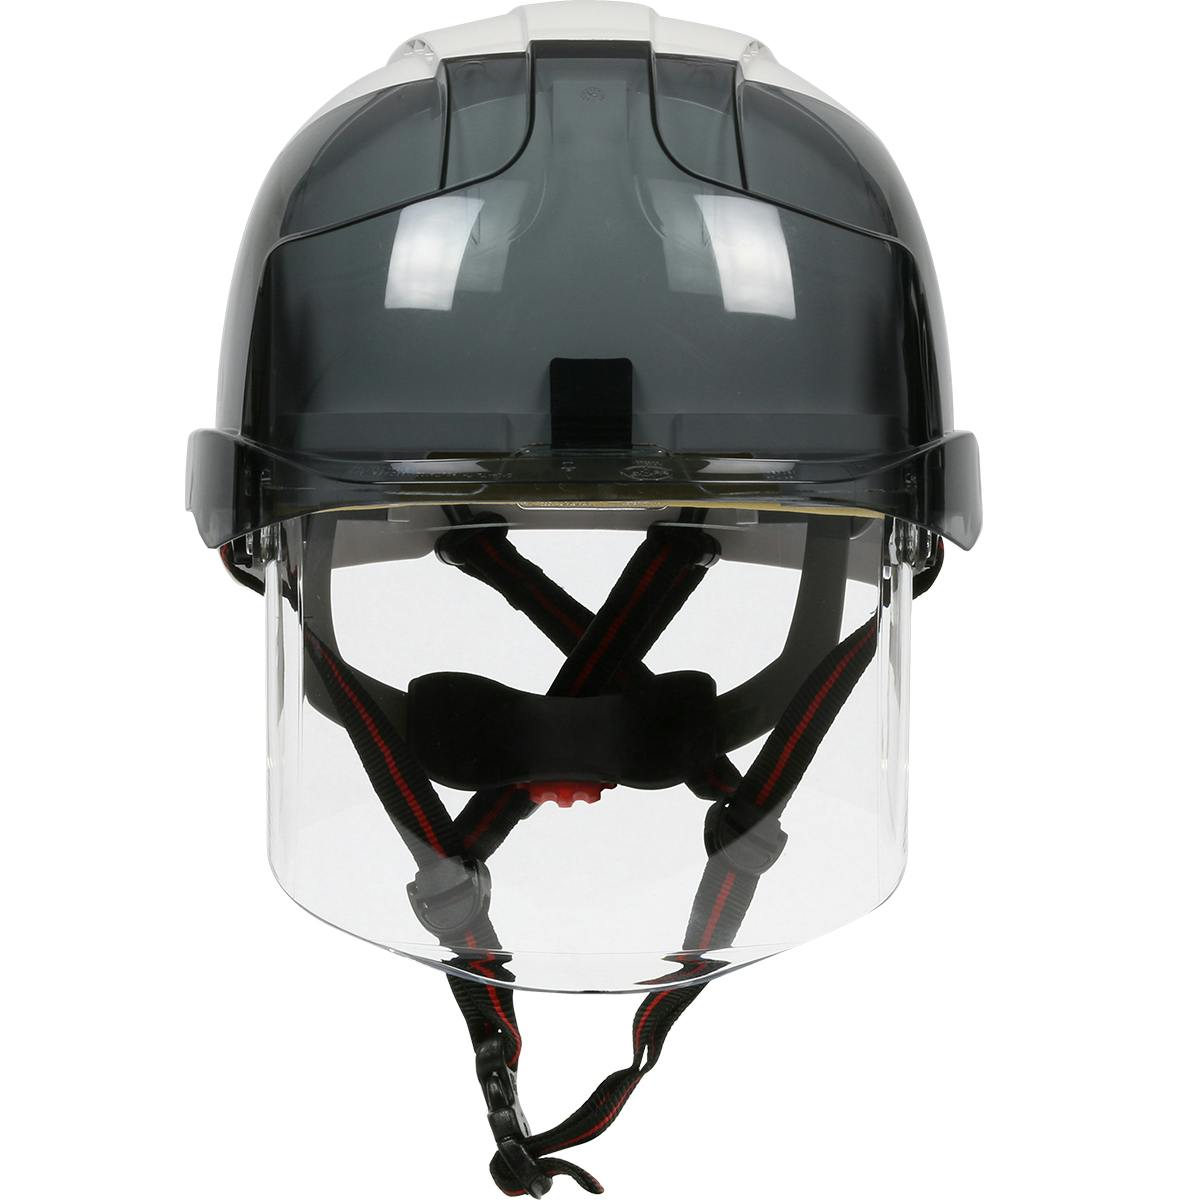 Type I, Non-vented Industrial Safety Helmet with fully adjustable four point chinstrap, Lightweight ABS Shell, Integrated Faceshield, 6-Point Polyester Suspension and Wheel Ratchet Adjustment, White-Smoke (280-EVSN-CH) - OS_1